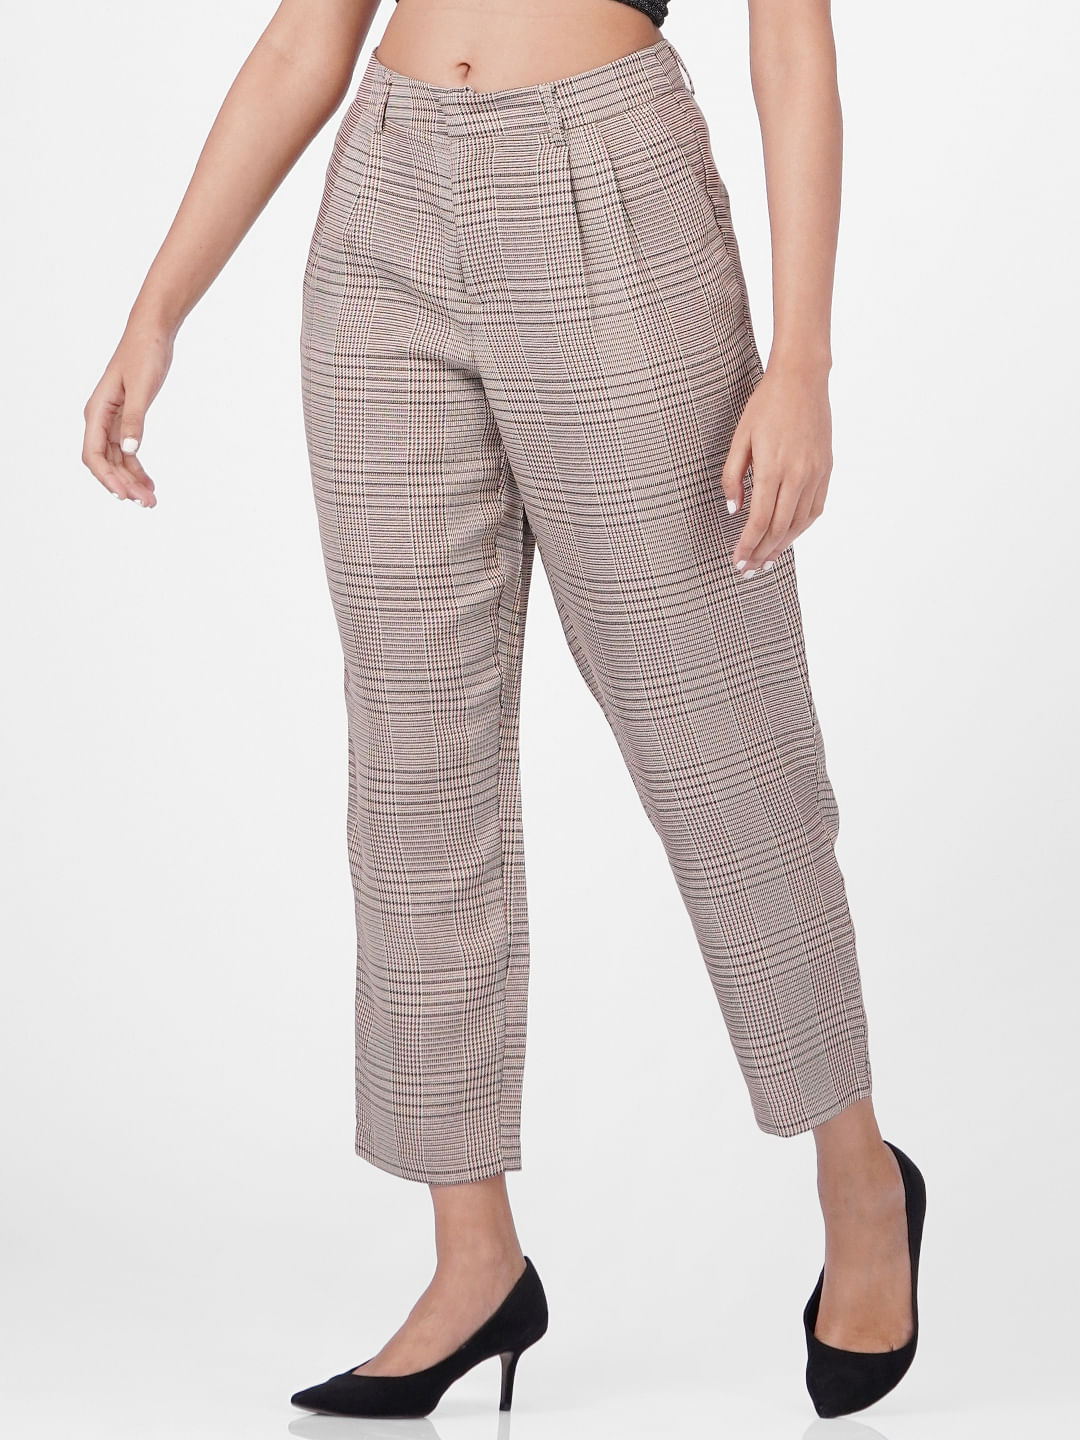 ONLY Trousers and Pants  Buy ONLY Women Checks Grey Pant Online  Nykaa  Fashion